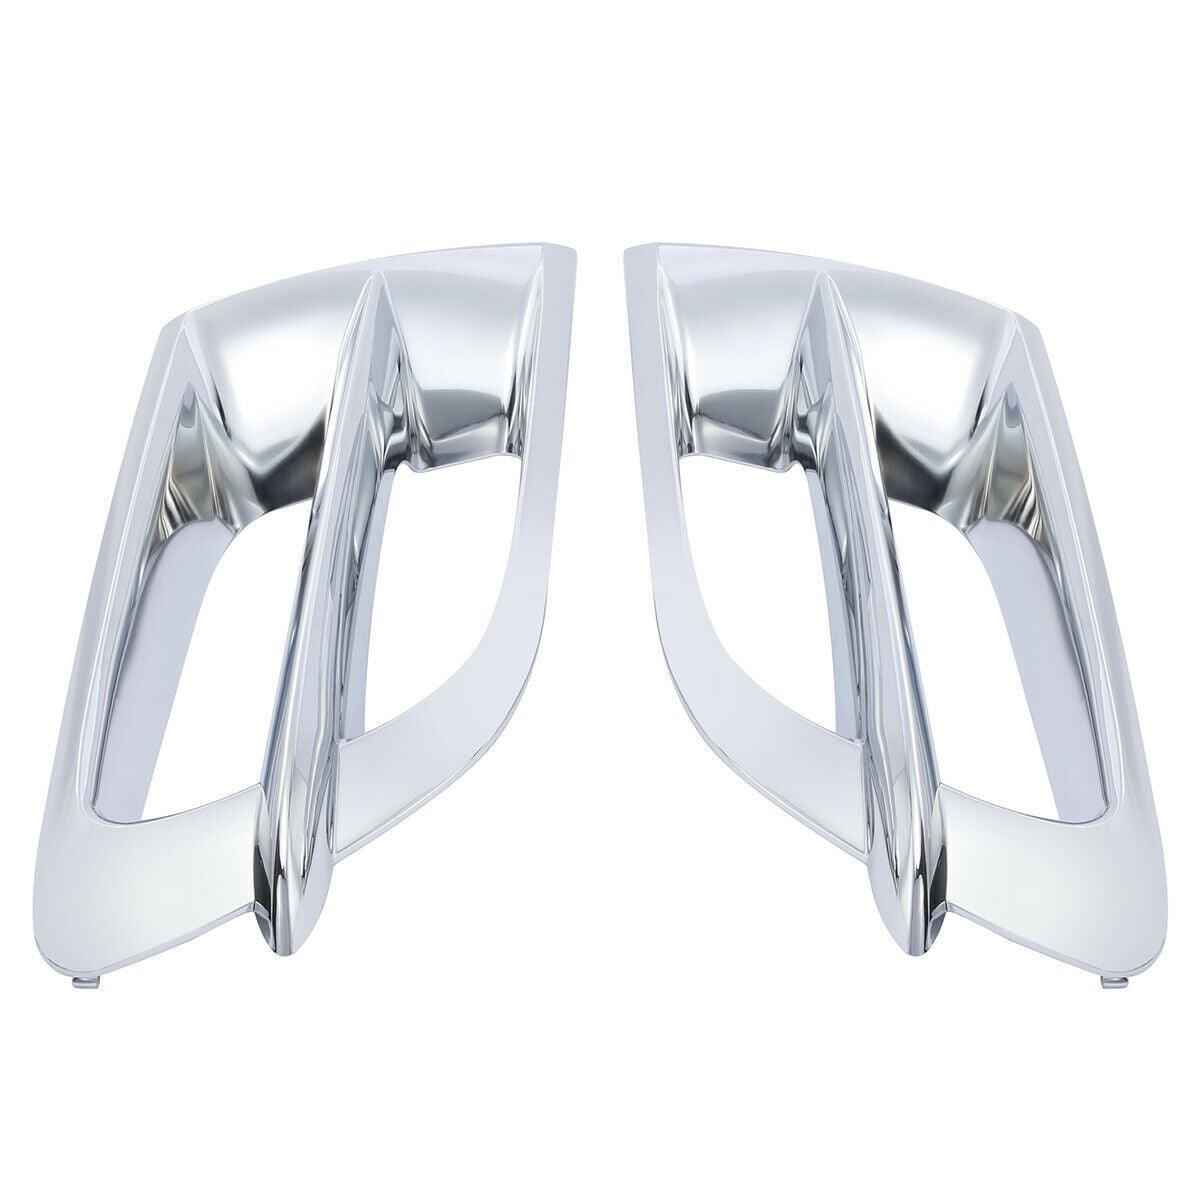 ABS L&R Side Fairing Accent Grilles For Honda Goldwing GL1800 2001-2011 Chrome - Moto Life Products